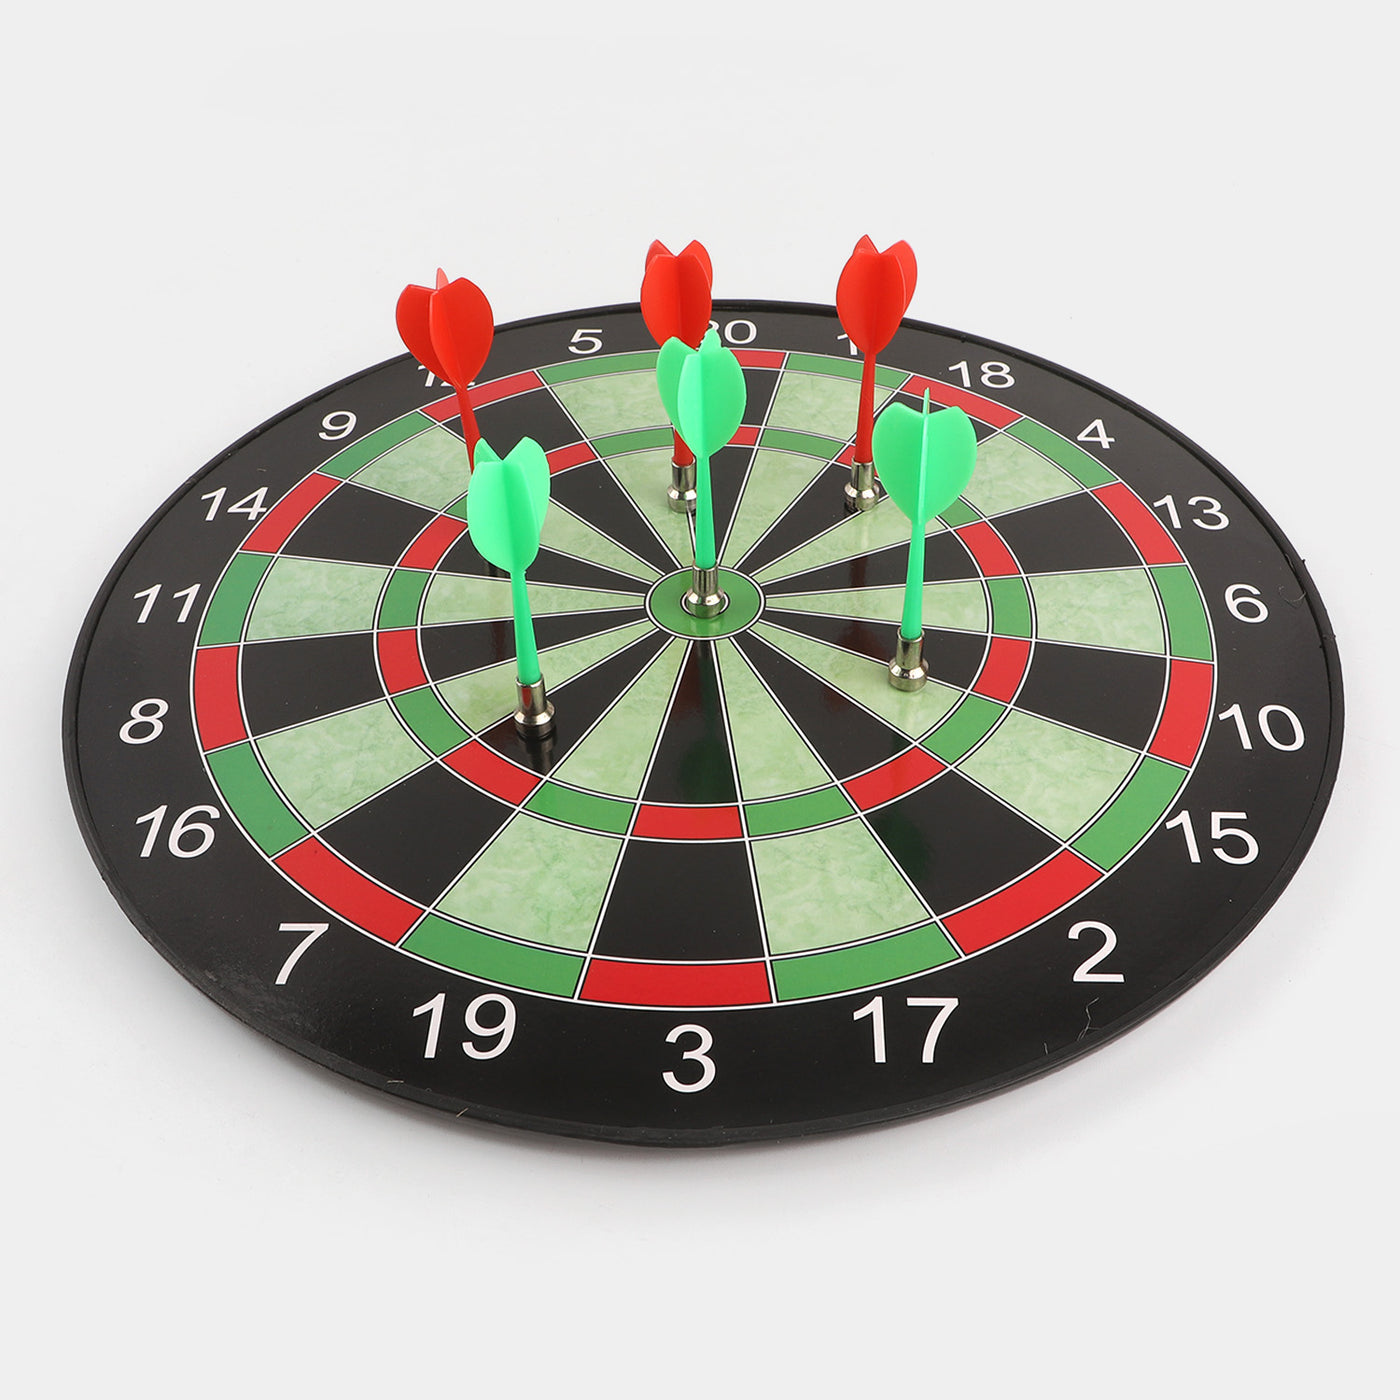 MAGNETIC DART GAME FOR KIDS